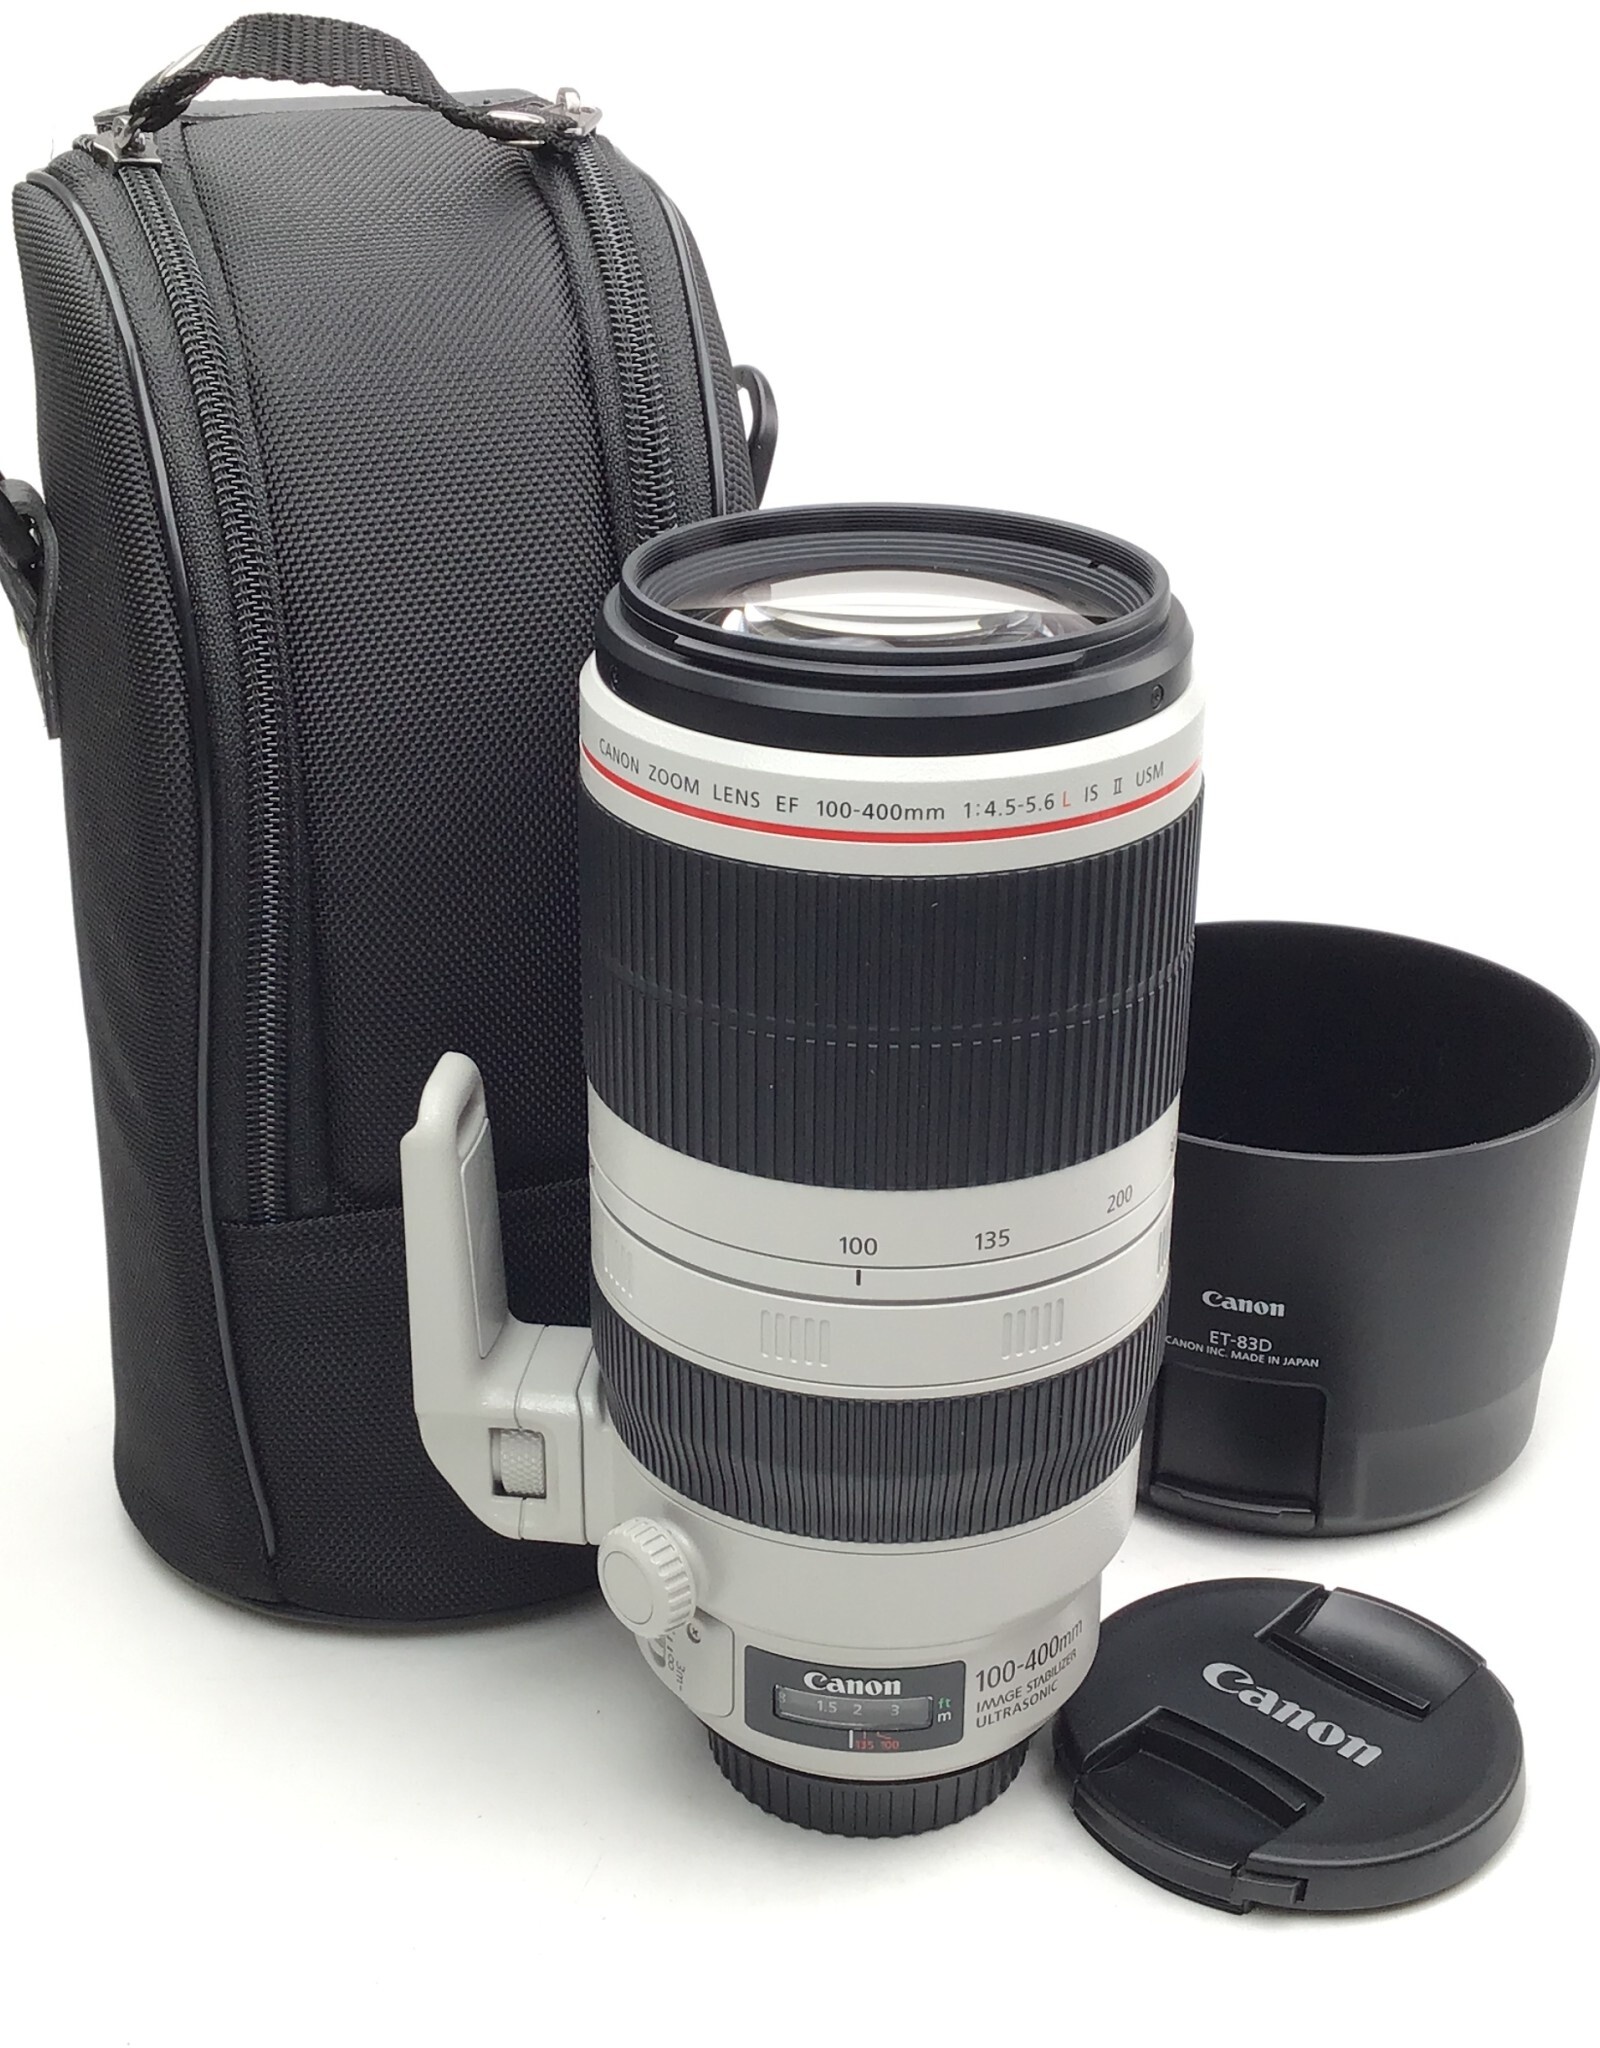 CANON Canon EF 100-400mm f4.5-5.6 L IS II USM Lens Used EX